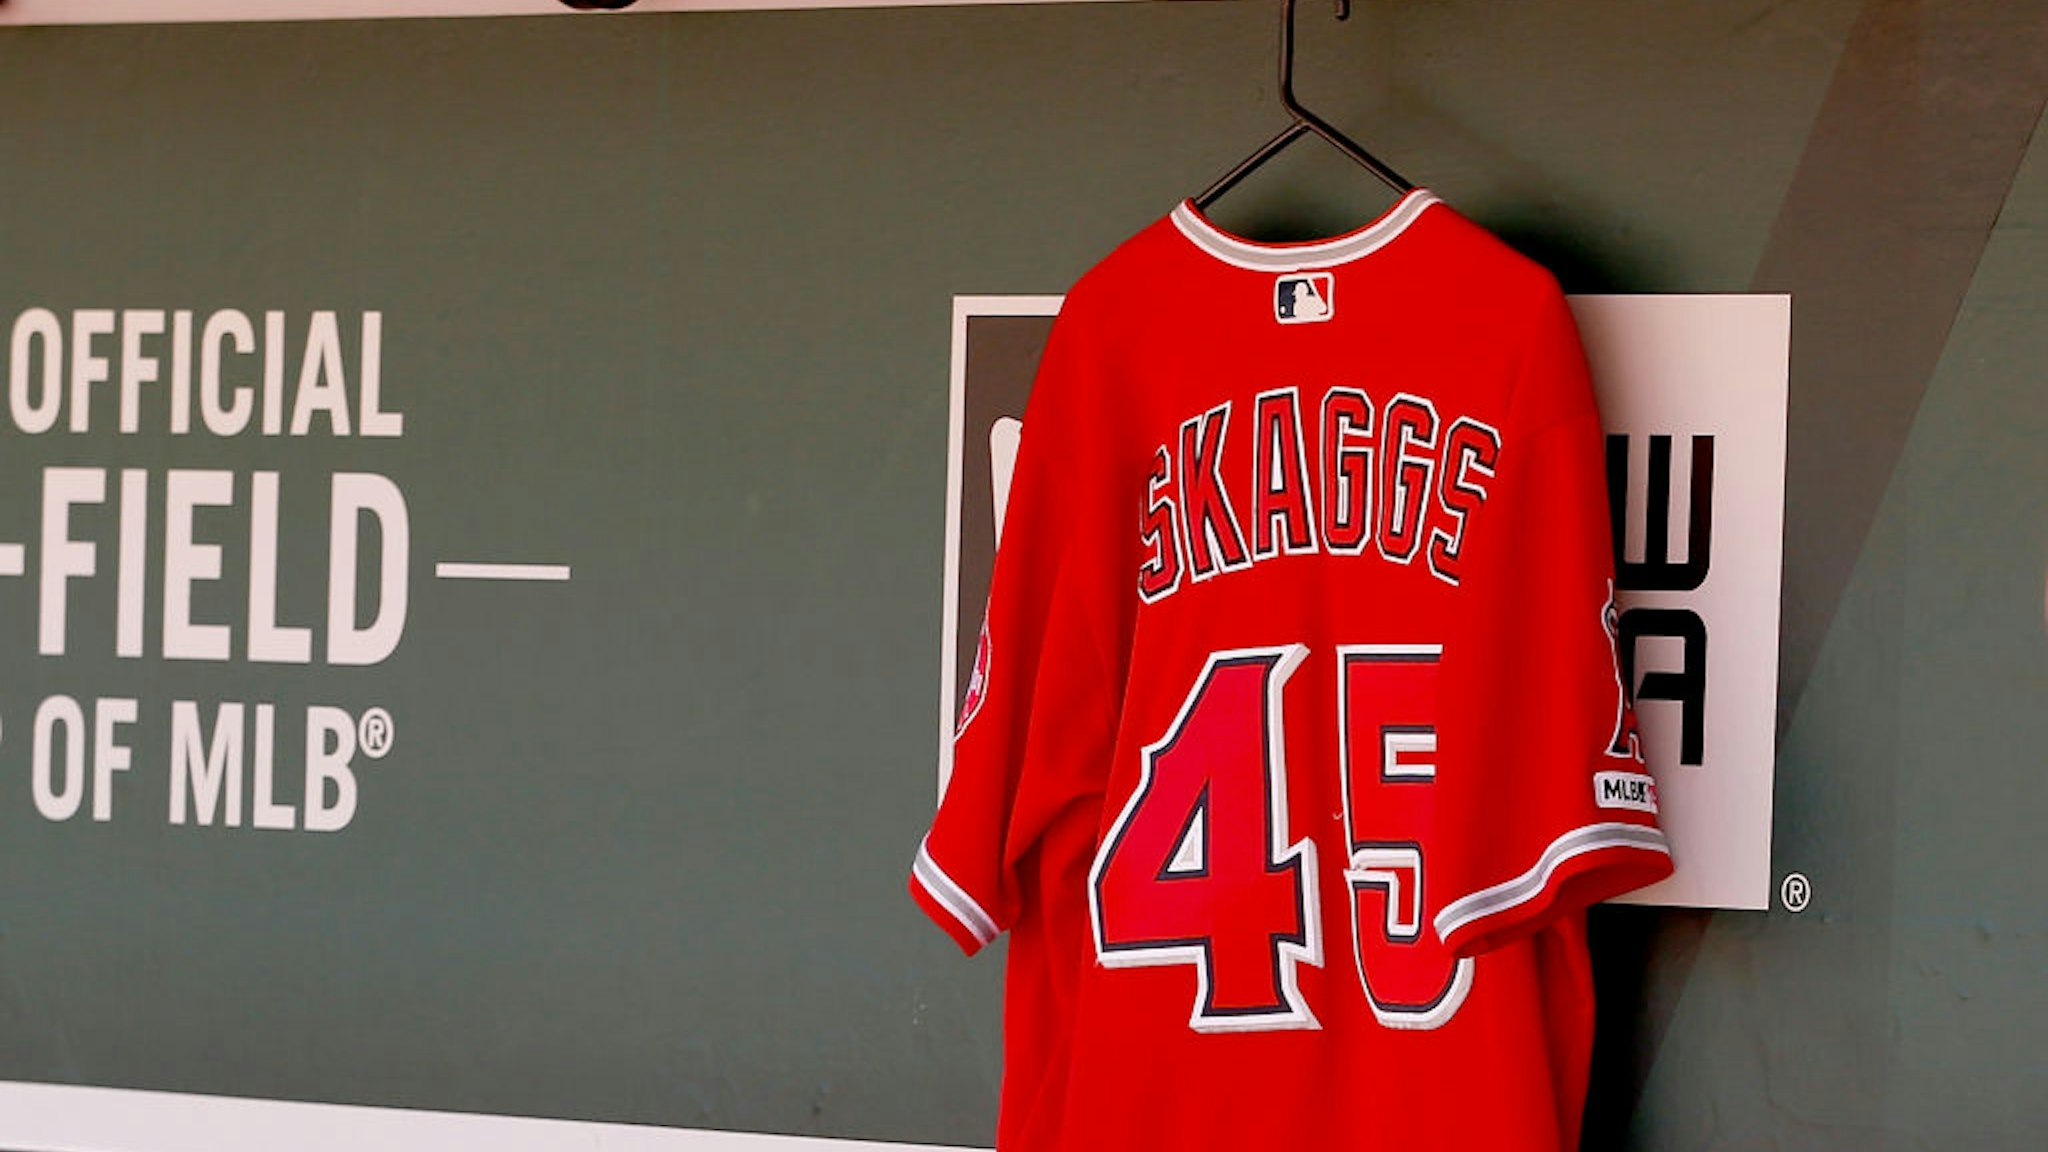 OAKLAND, CALIFORNIA - SEPTEMBER 05: The #45 jersey of recently deceased Los Angeles Angels player Tyler Skaggs hangs in the team's dugout before the game against the Los Angeles Angels at Ring Central Coliseum on September 05, 2019 in Oakland, California. (Photo by Lachlan Cunningham/Getty Images)